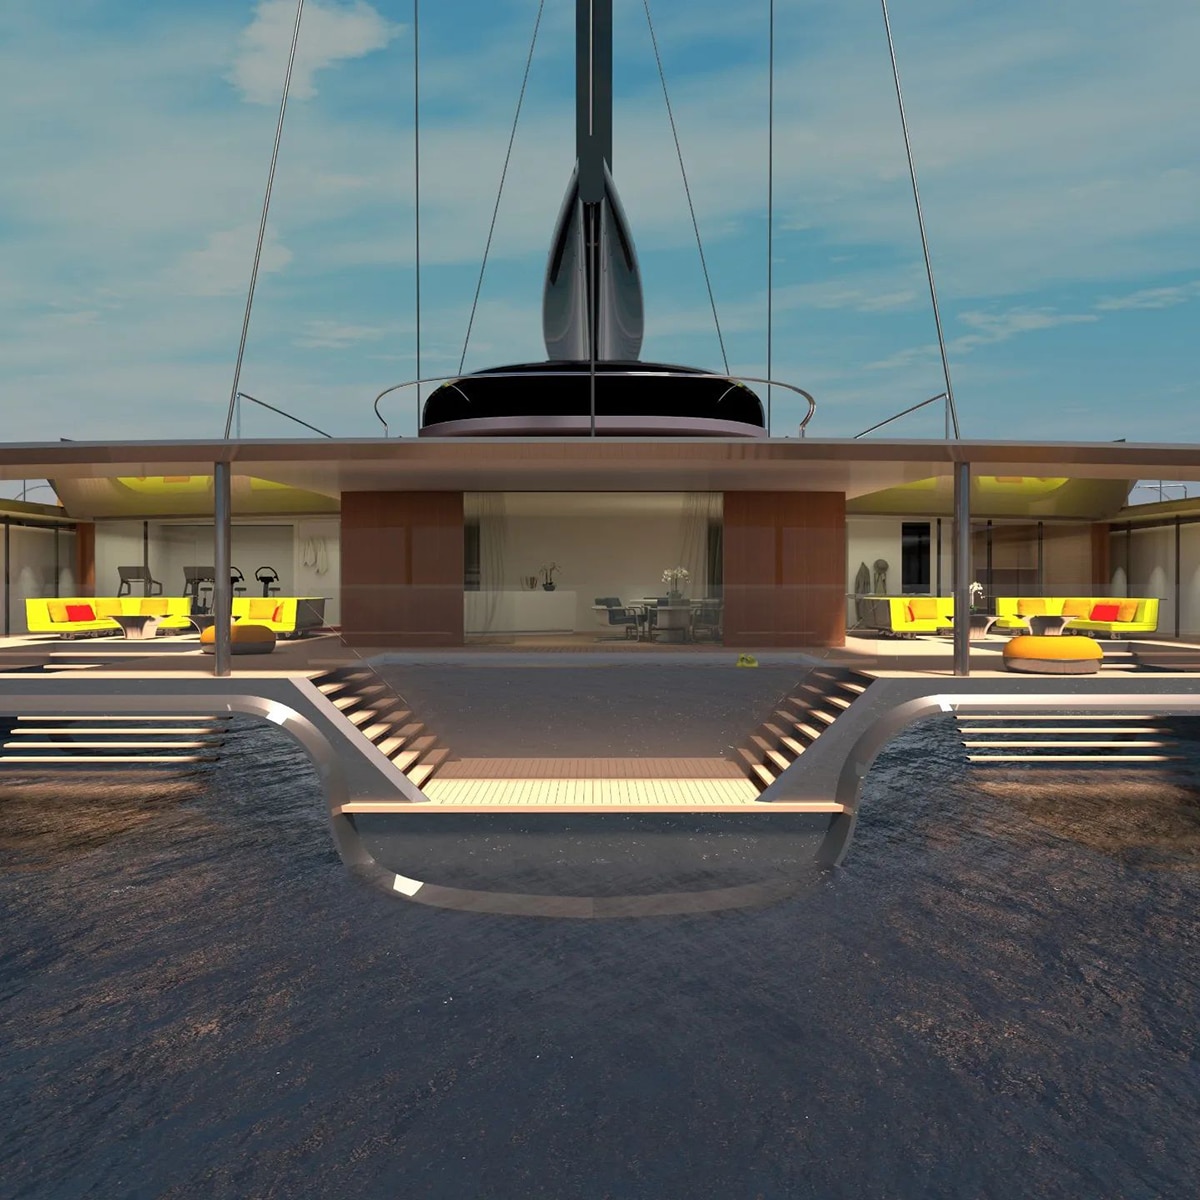 This zero-emission superyacht could well become a reality | Luxus Magazine